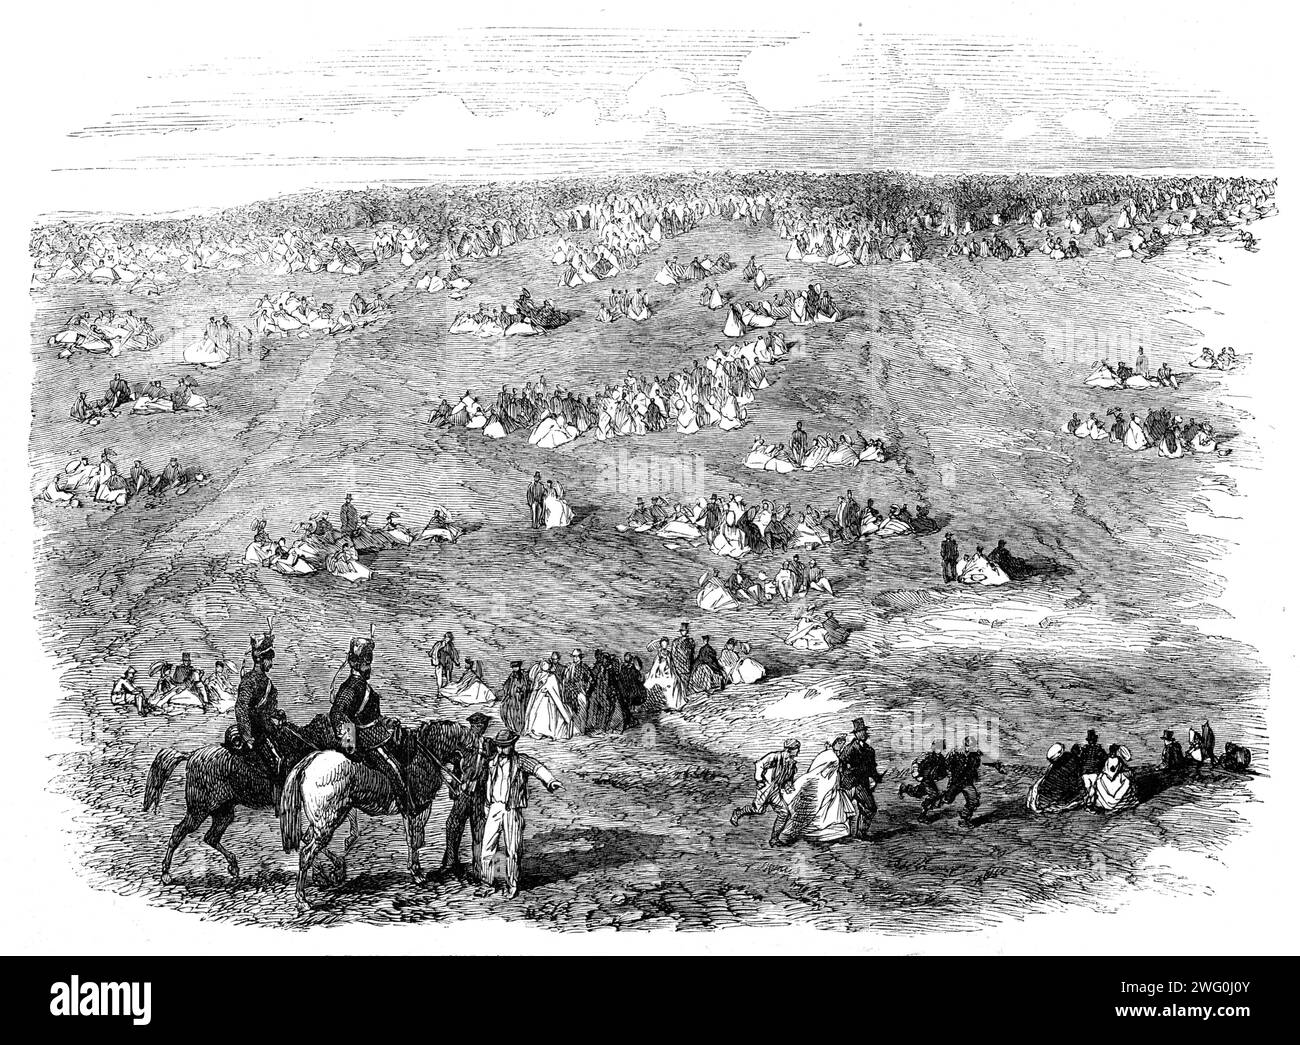 The Volunteer Field-Day at Brighton: people on the Downs, 1862. 'Nothing could be finer than the approach of something like 12,000 men in close column, at quick march, up the steep hill leading to the racecourse...The whole aspect of the field, as seen from the Grand Stand, was magnificent in the extreme...On each side, as far as the racecourse extended, was a dense body of spectators, which appeared to stretch away for miles...a few artillery troops could by the aid of a good glass be seen unlimbering two or three guns...the furthermost brigade [offered], in the bright scarlet uniform of two Stock Photo